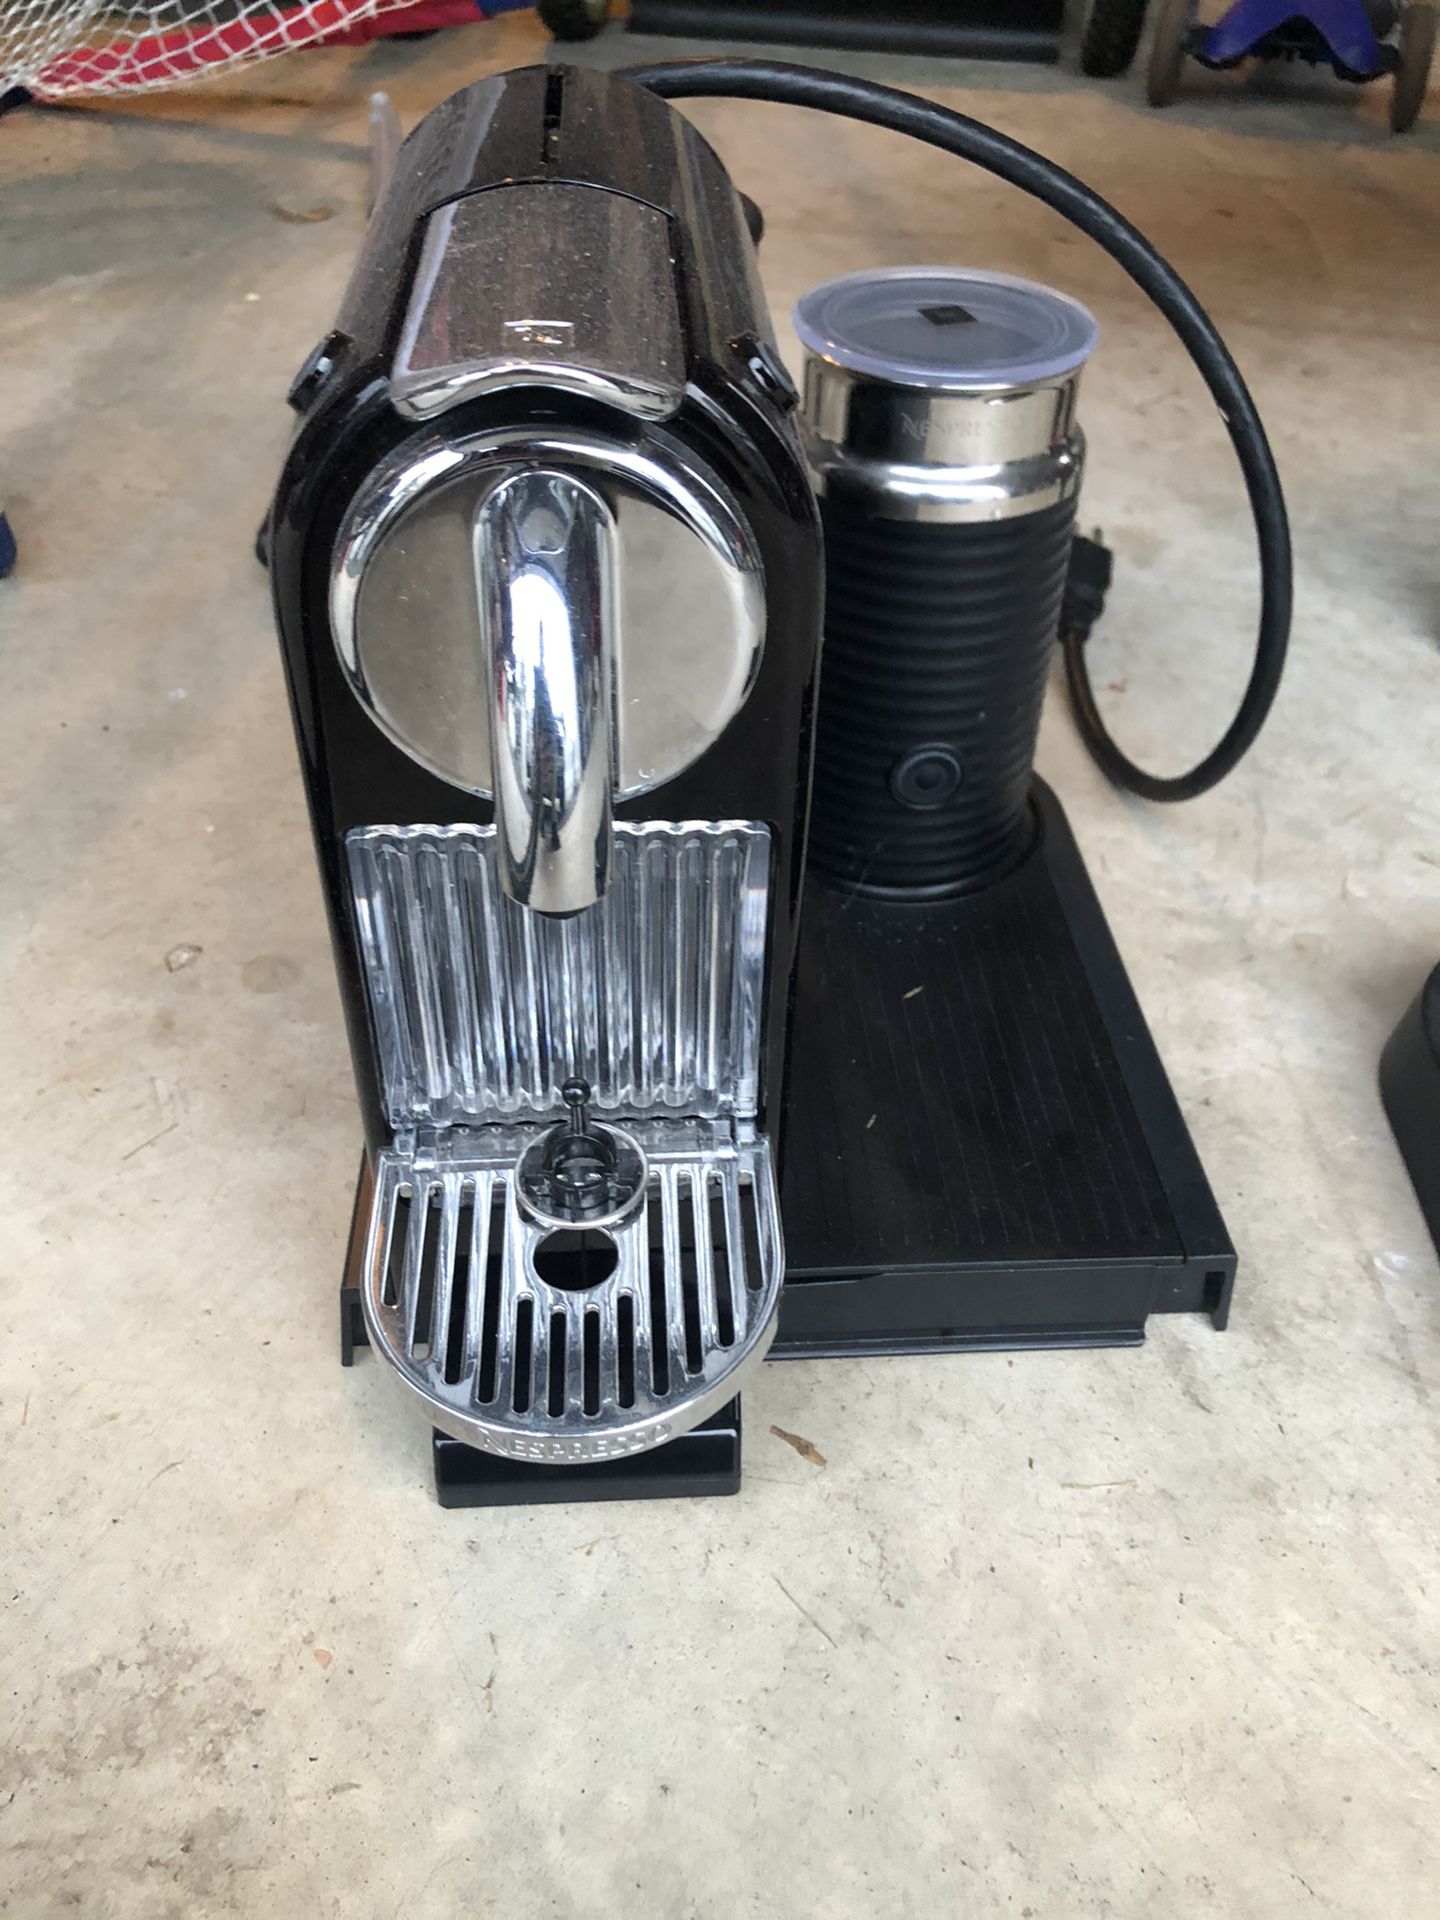 Nespresso D121 with Milk Frother